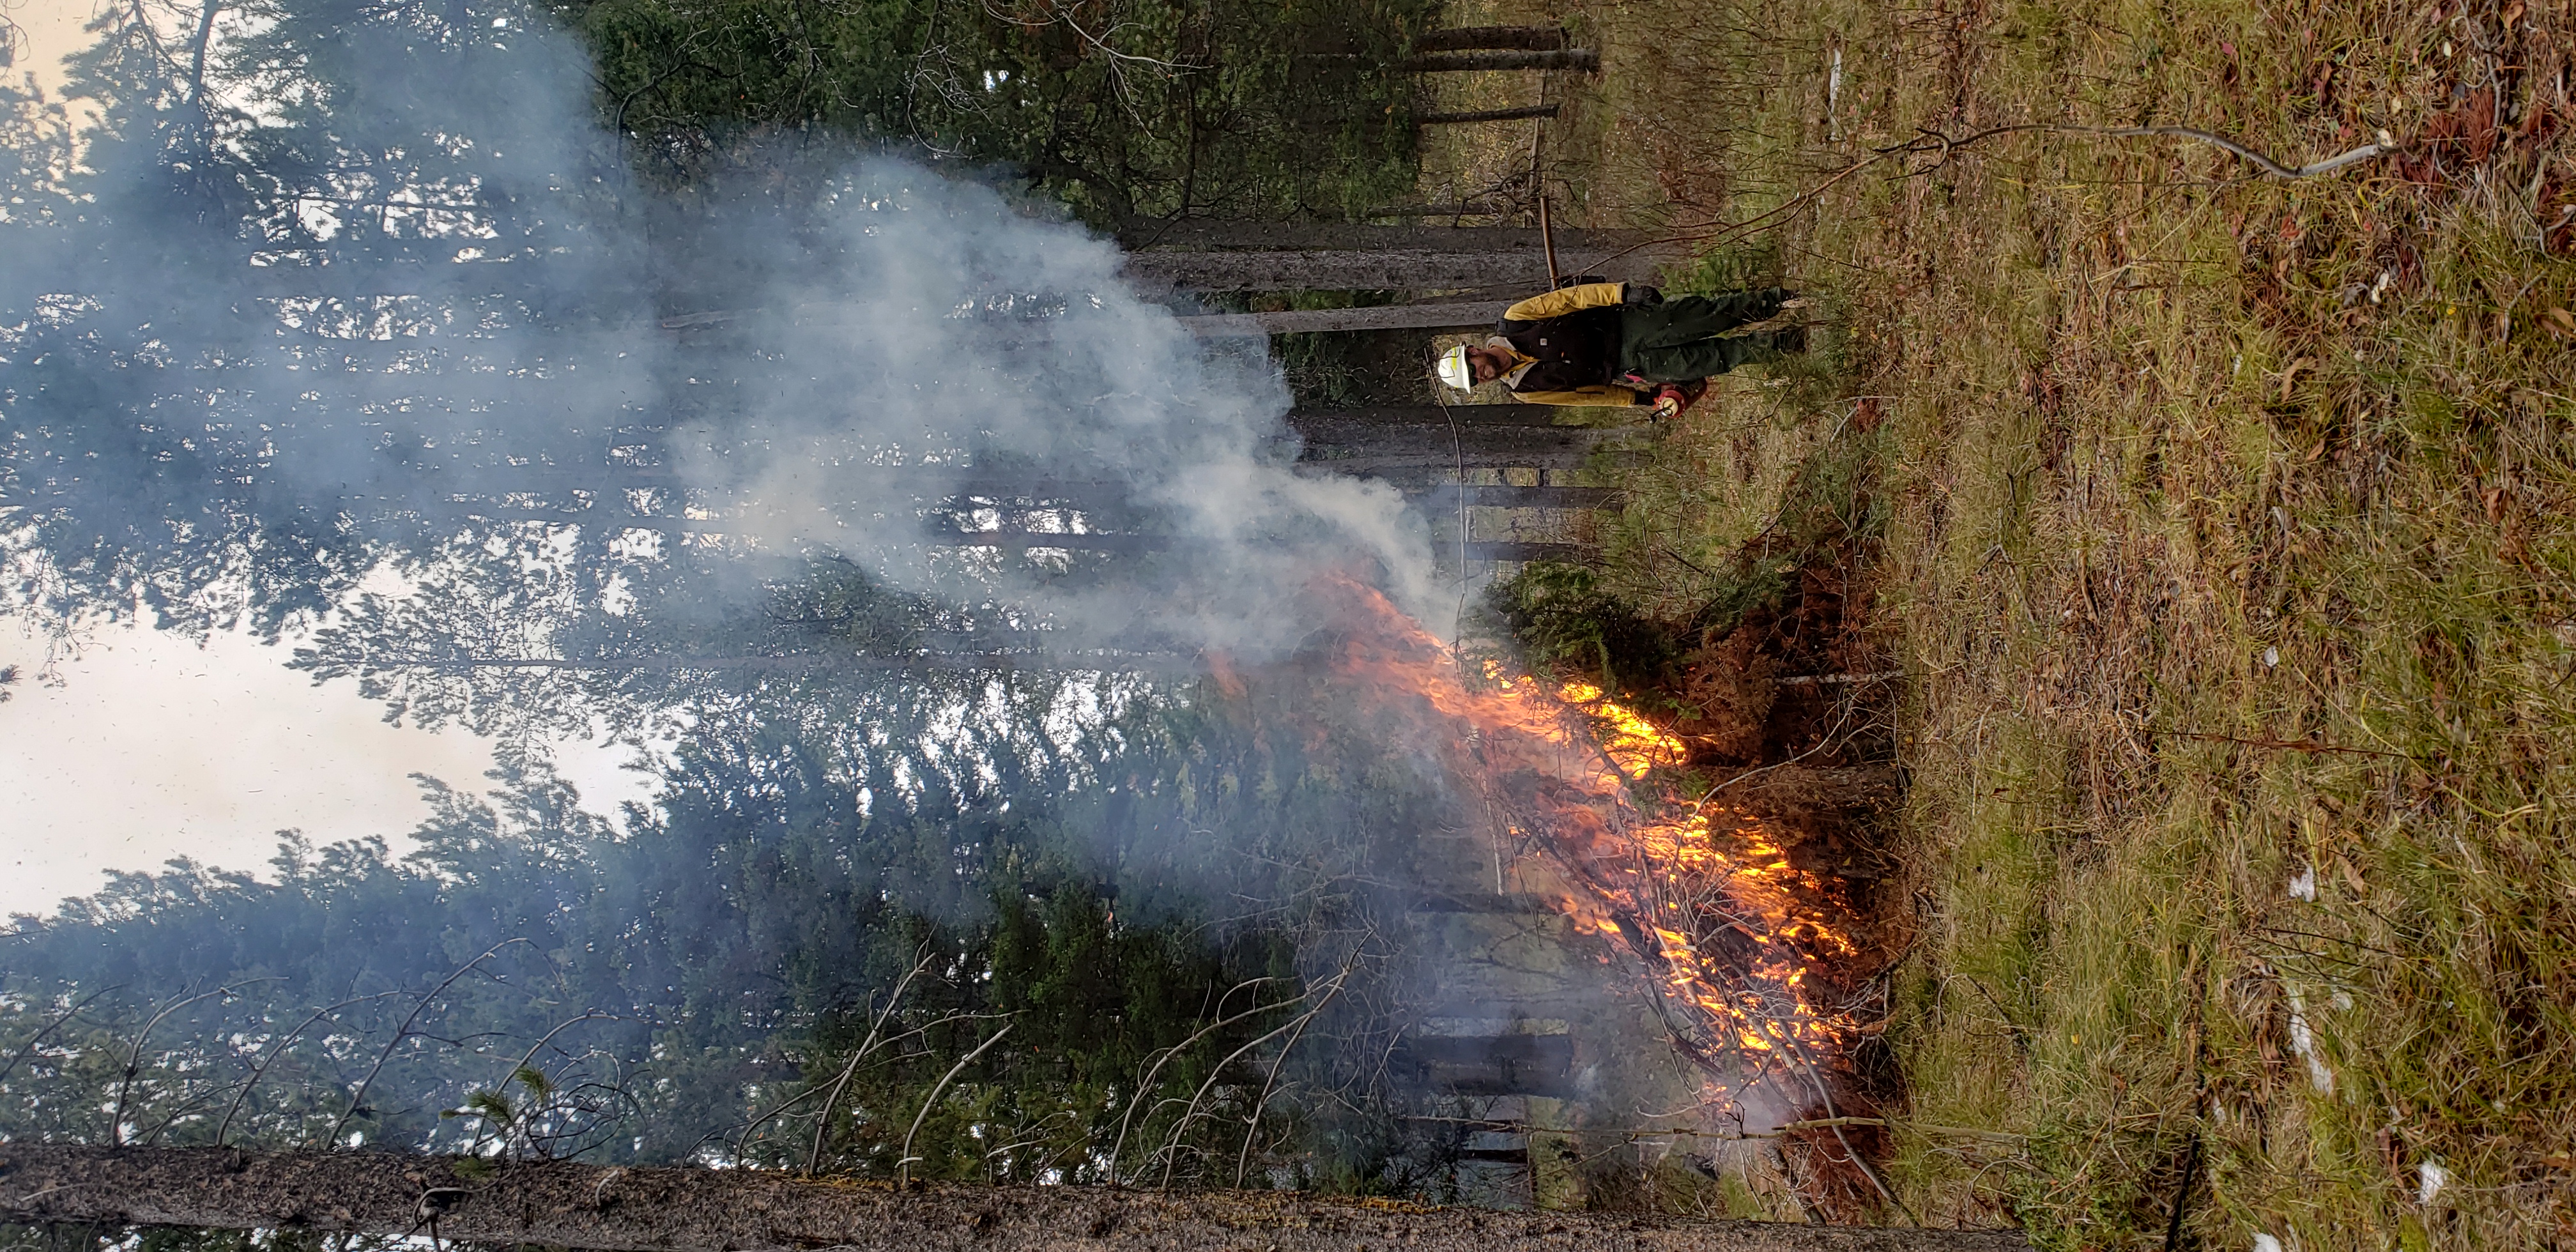 A person watches a pile of tree limbs burn in a forest.